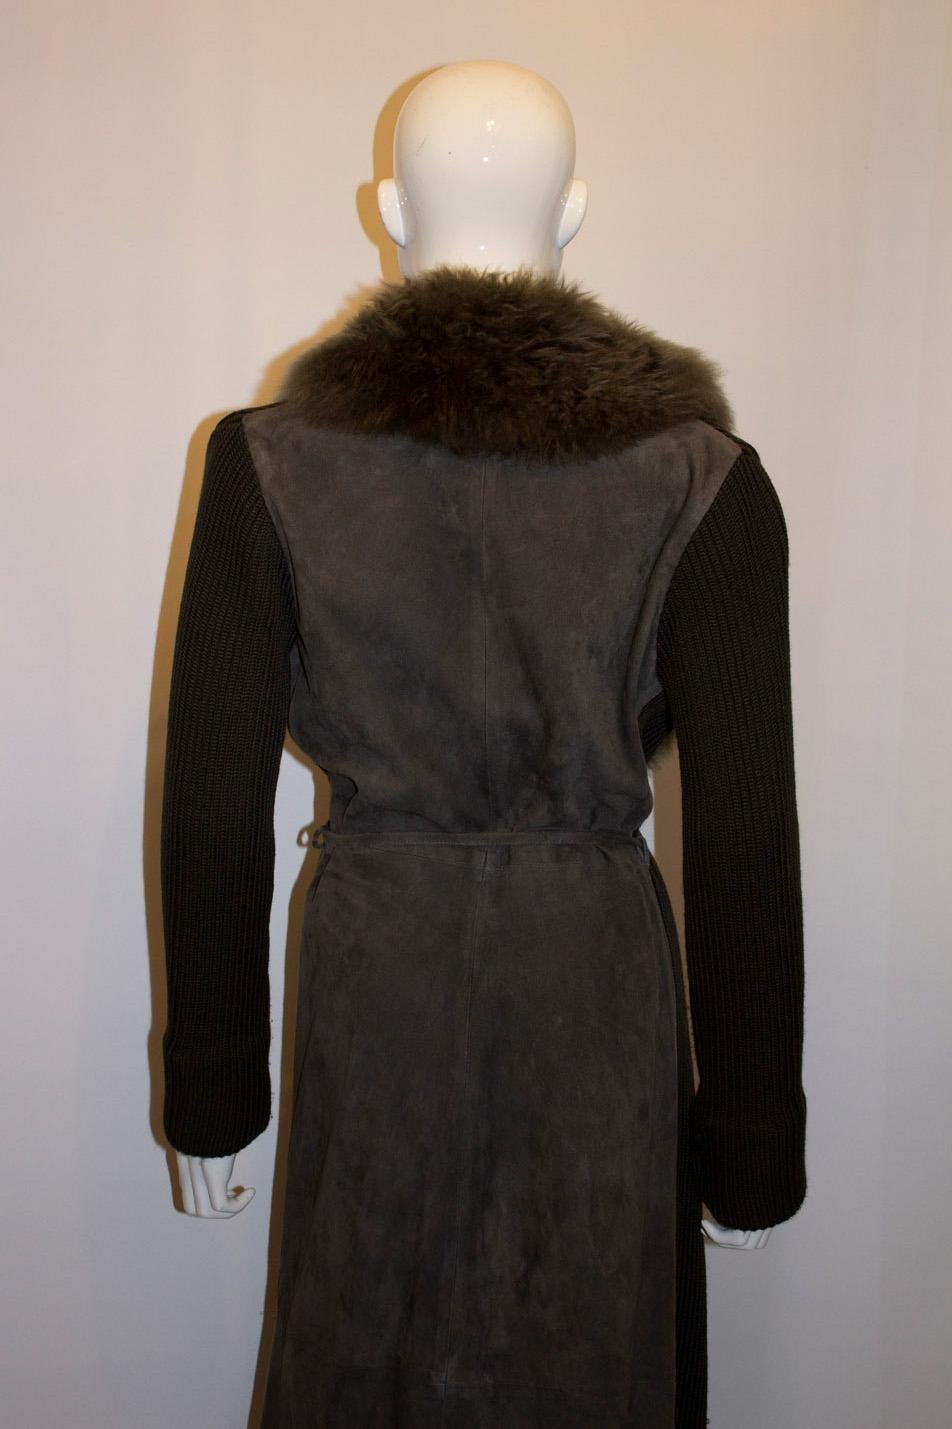 A warm and wonderful long  vintage jacket by Joseph. The jacket is in an attractive olive green colour and is a mix of knit  and suede with a faux fur collar.  It has a tie belt. 
Size s Measurements : Bust 36'', length 53''